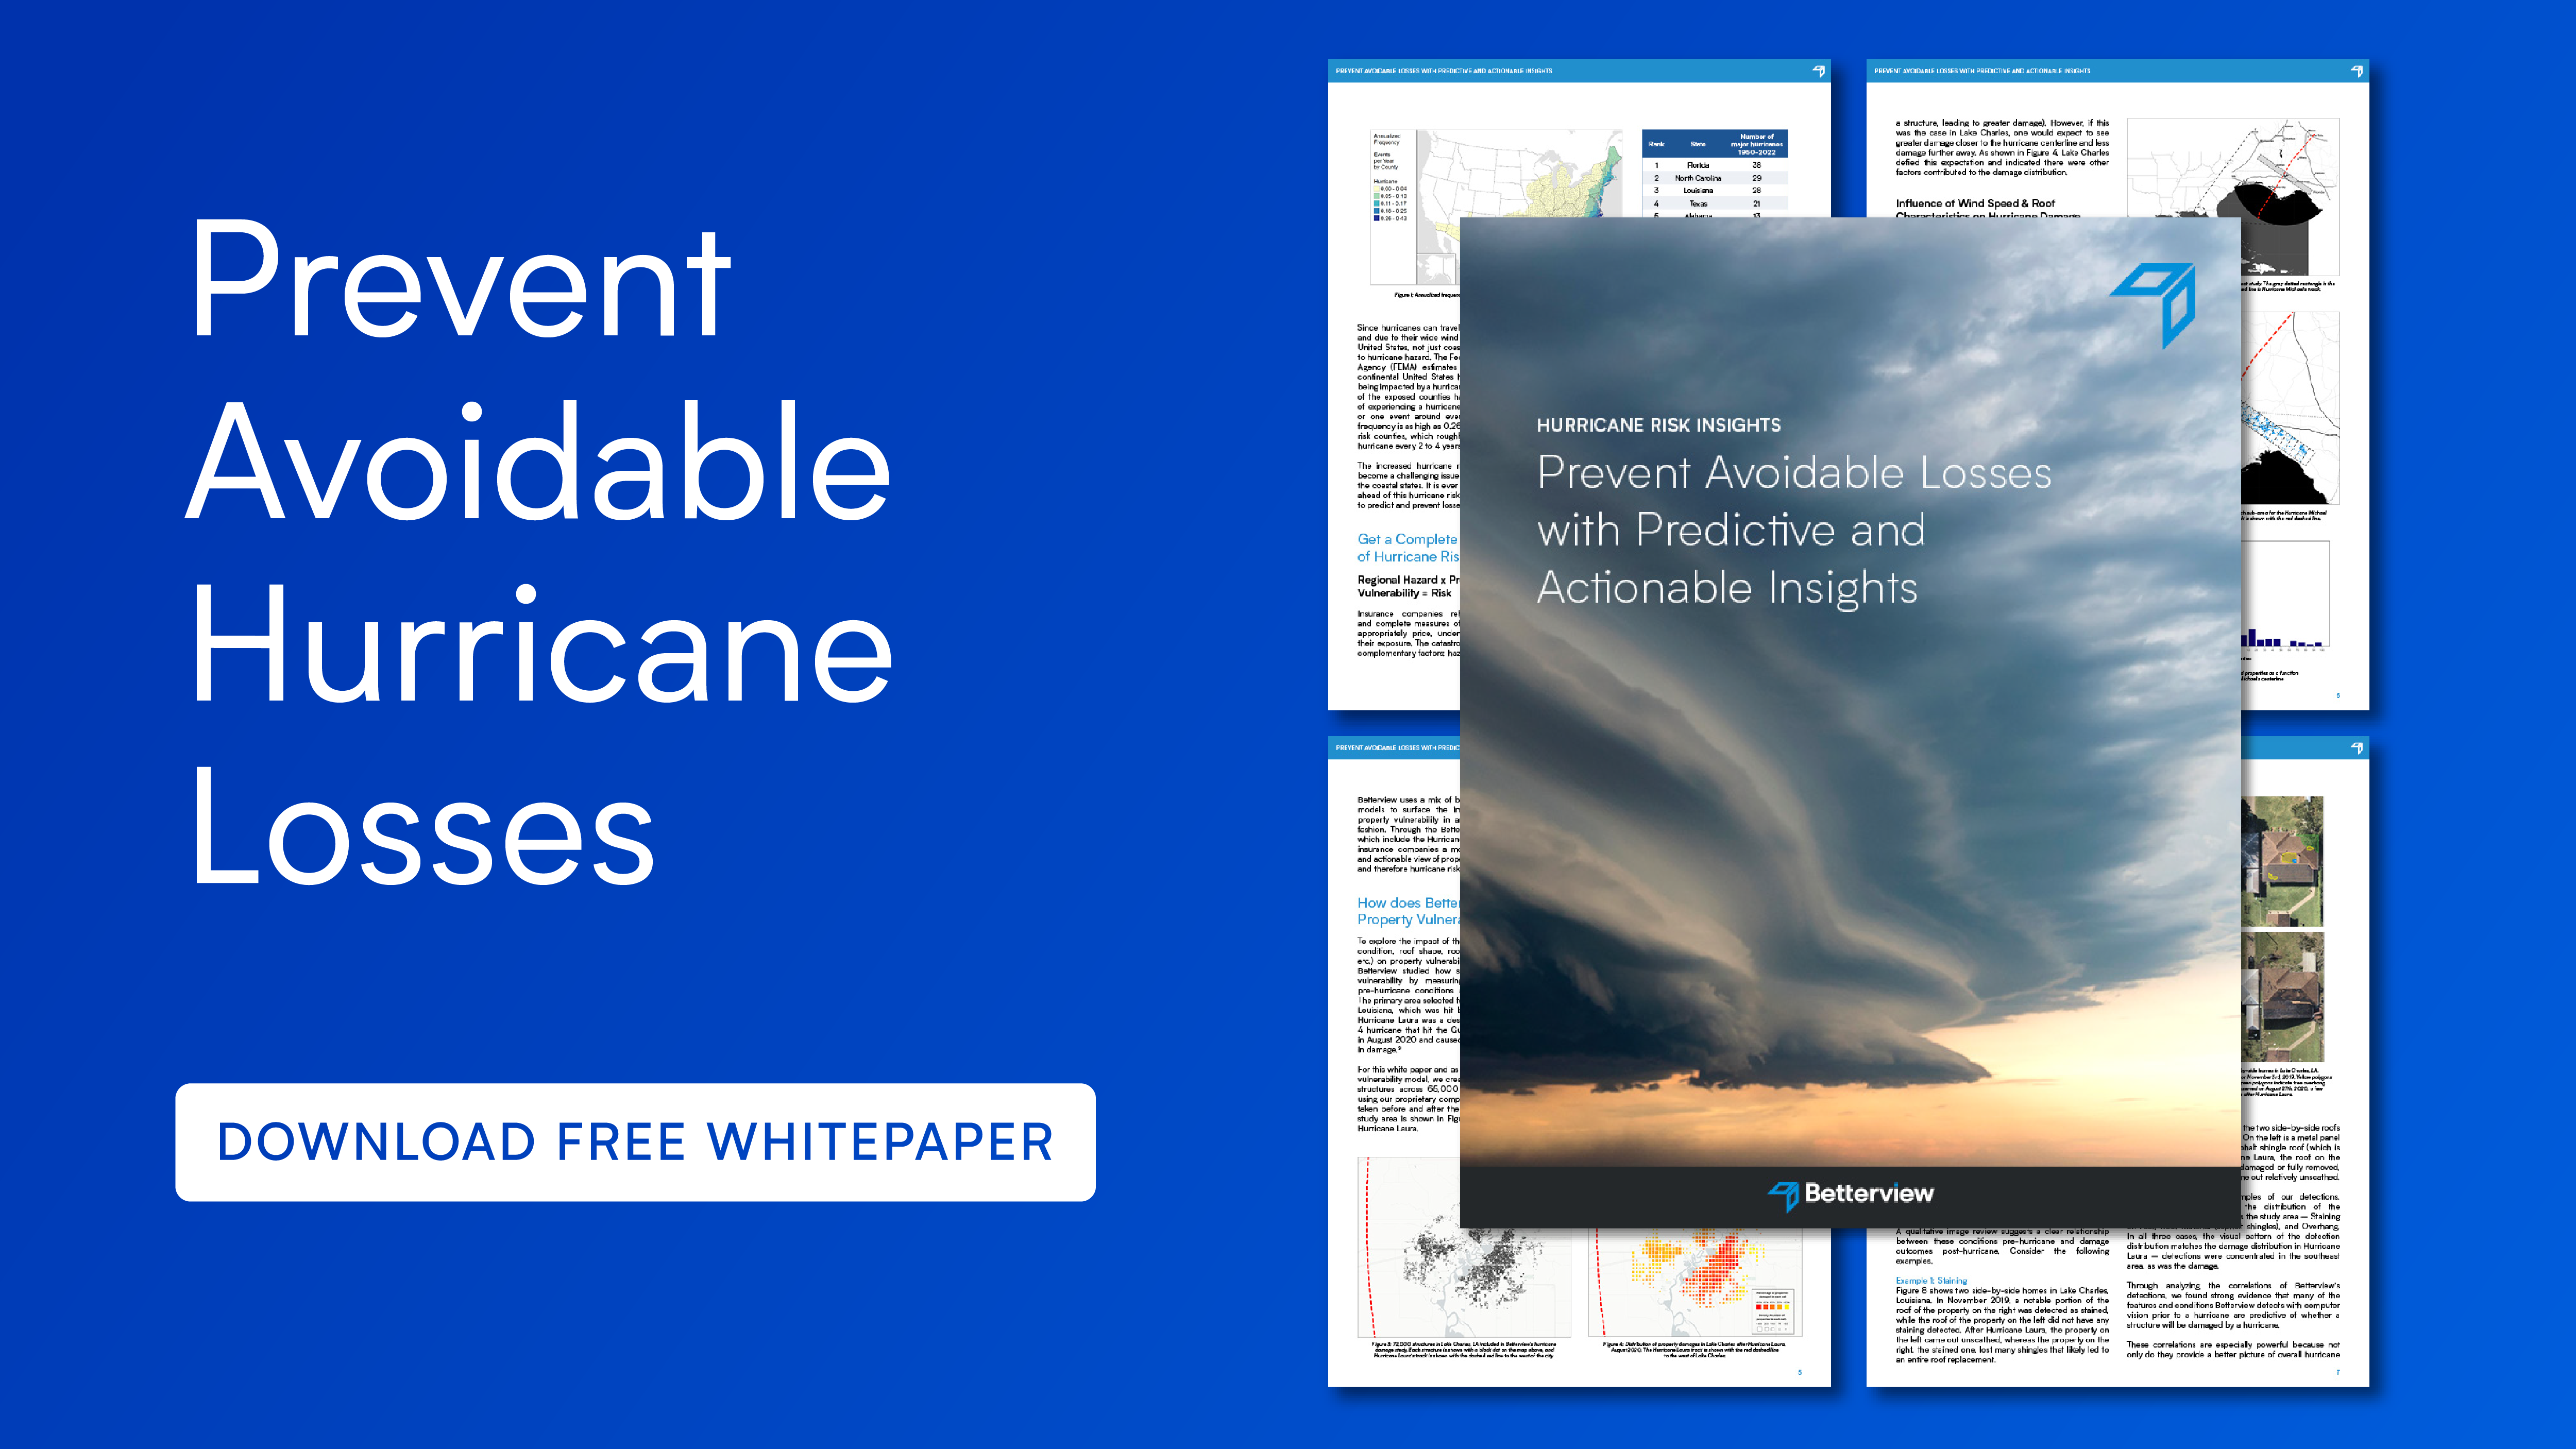 Prevent Hurricane Losses with Actionable Insights: A New White Paper from Betterview